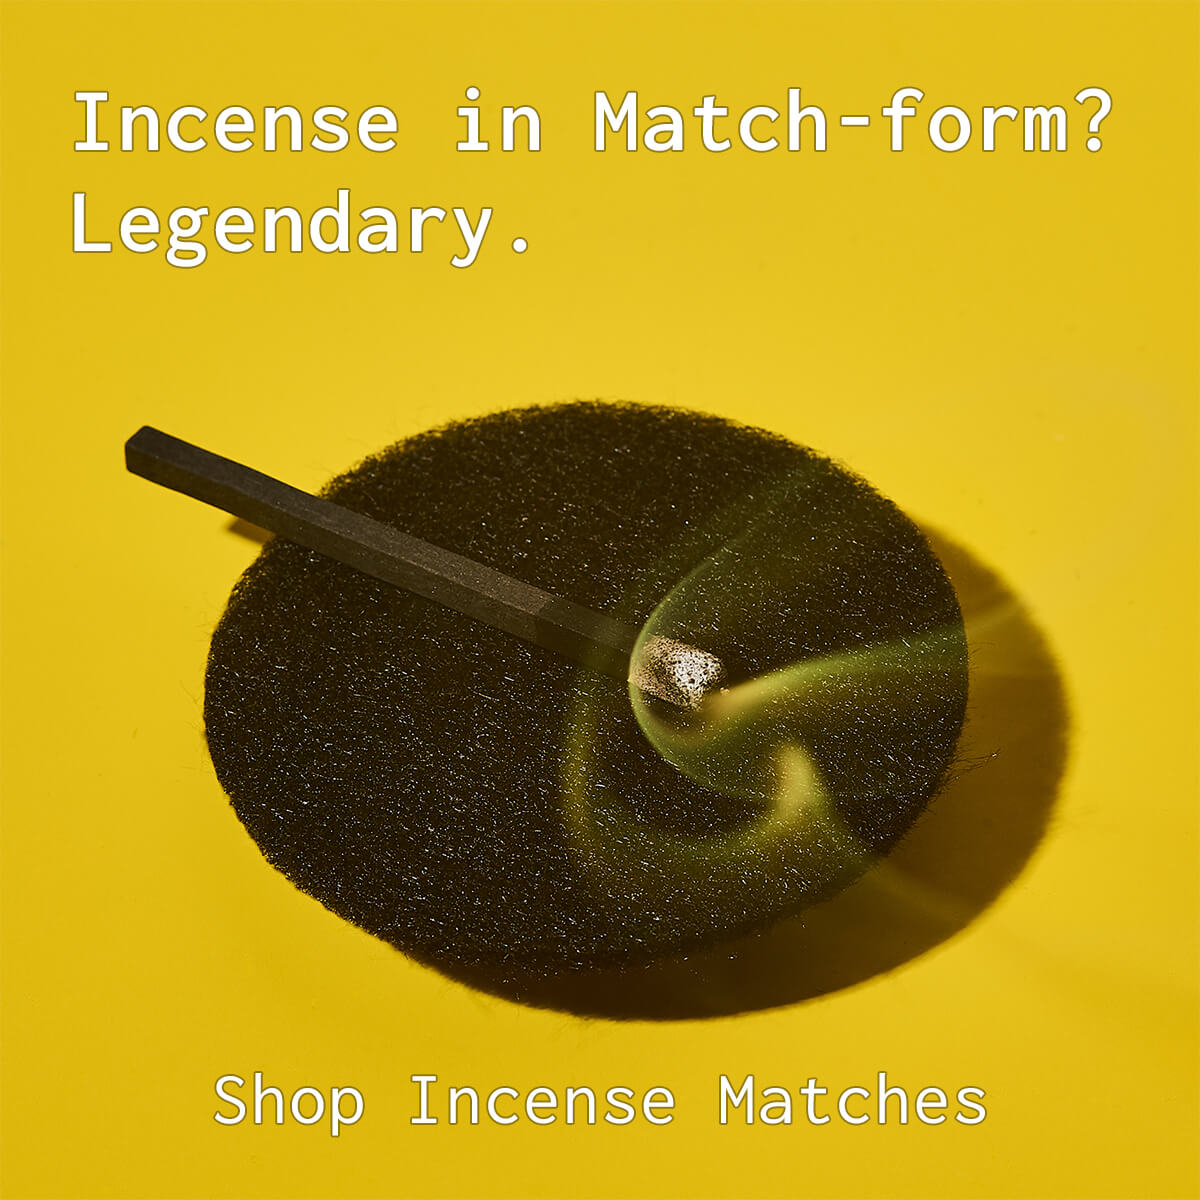 collection matches-and-lighters-smoke-shop/incense-matches